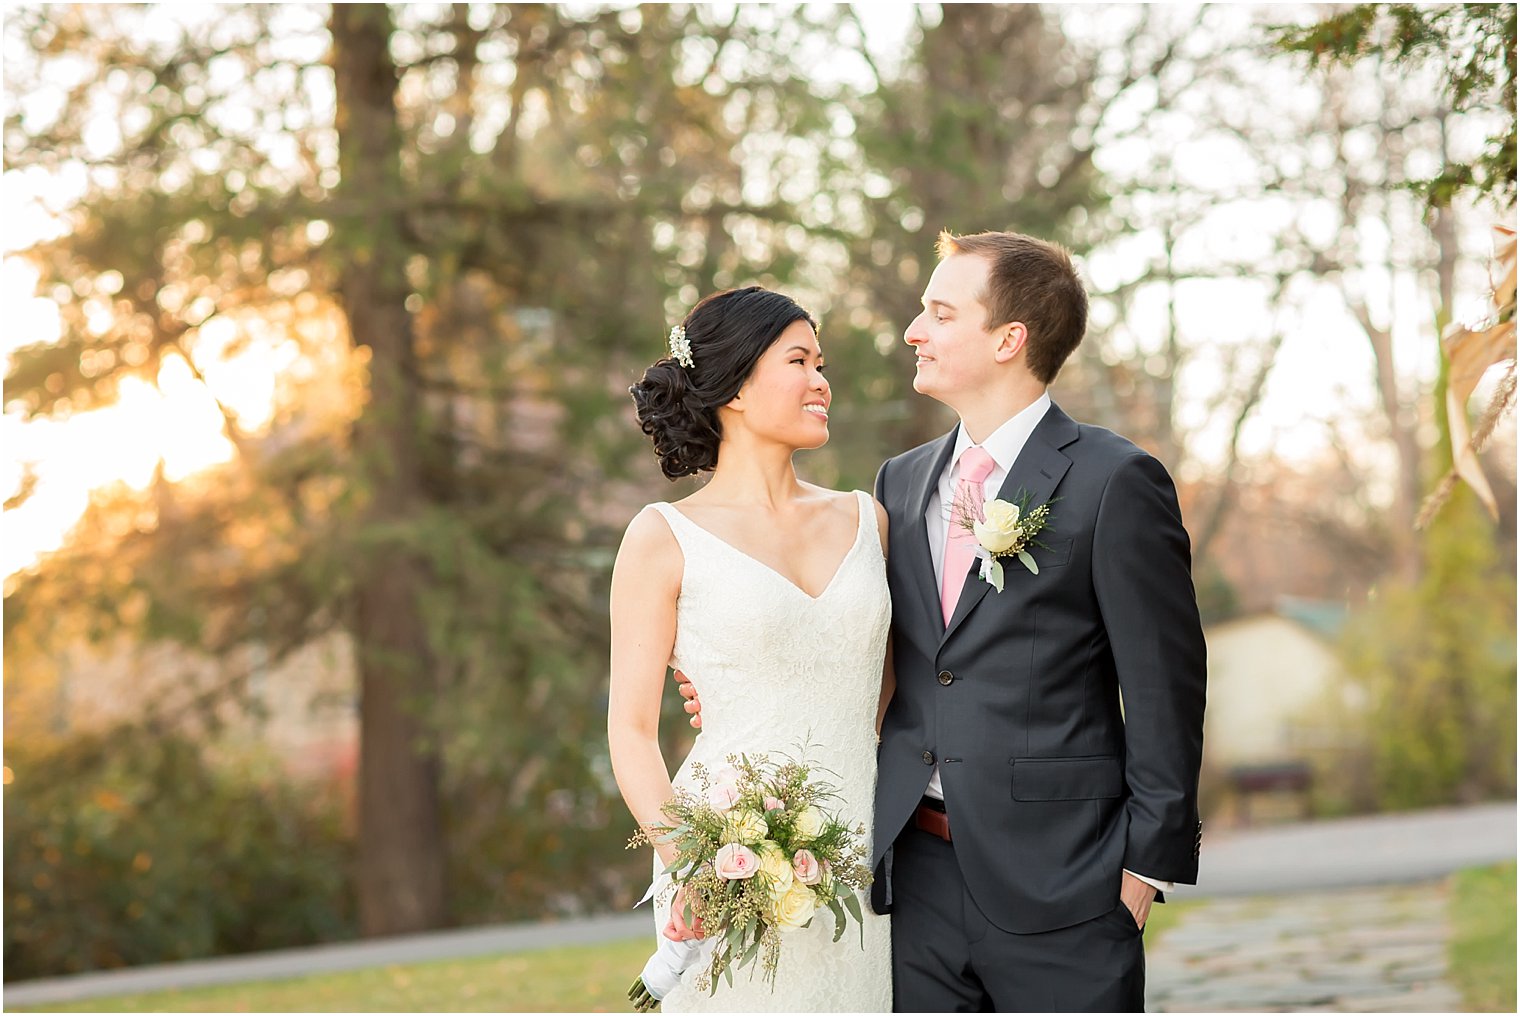 Bride and groom formals during golden hour